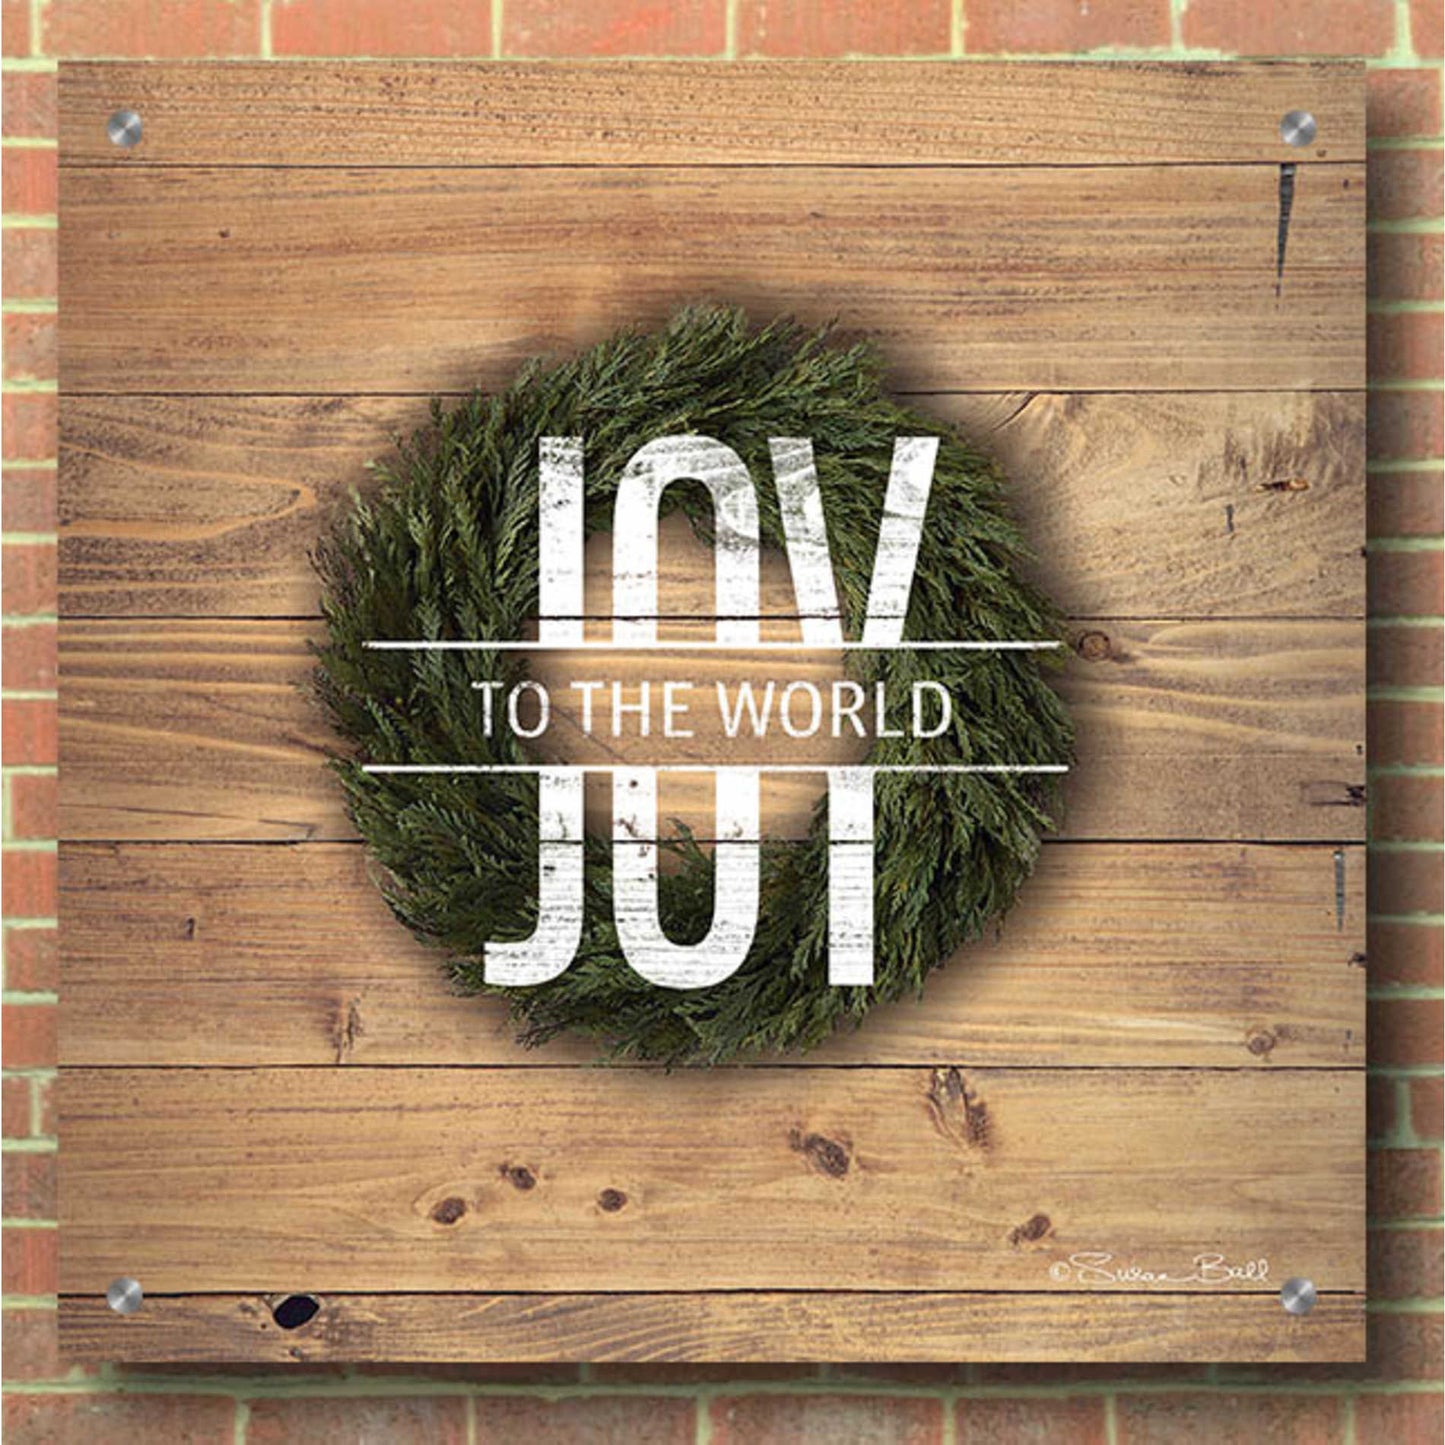 Epic Art 'Joy to the World with Wreath' by Susan Ball, Acrylic Glass Wall Art,36x36